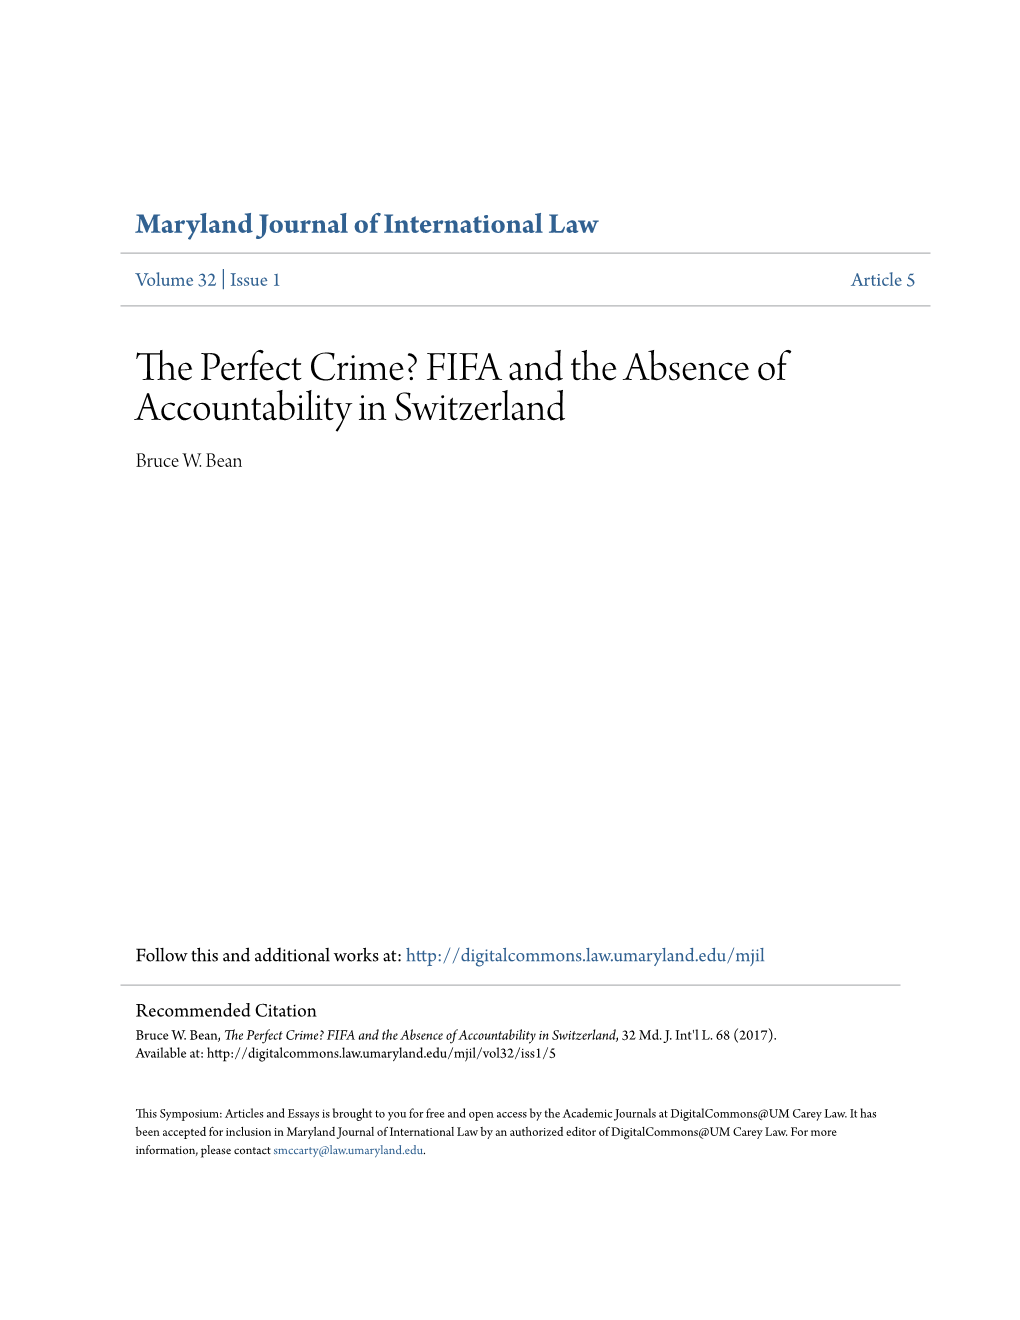 FIFA and the Absence of Accountability in Switzerland Bruce W